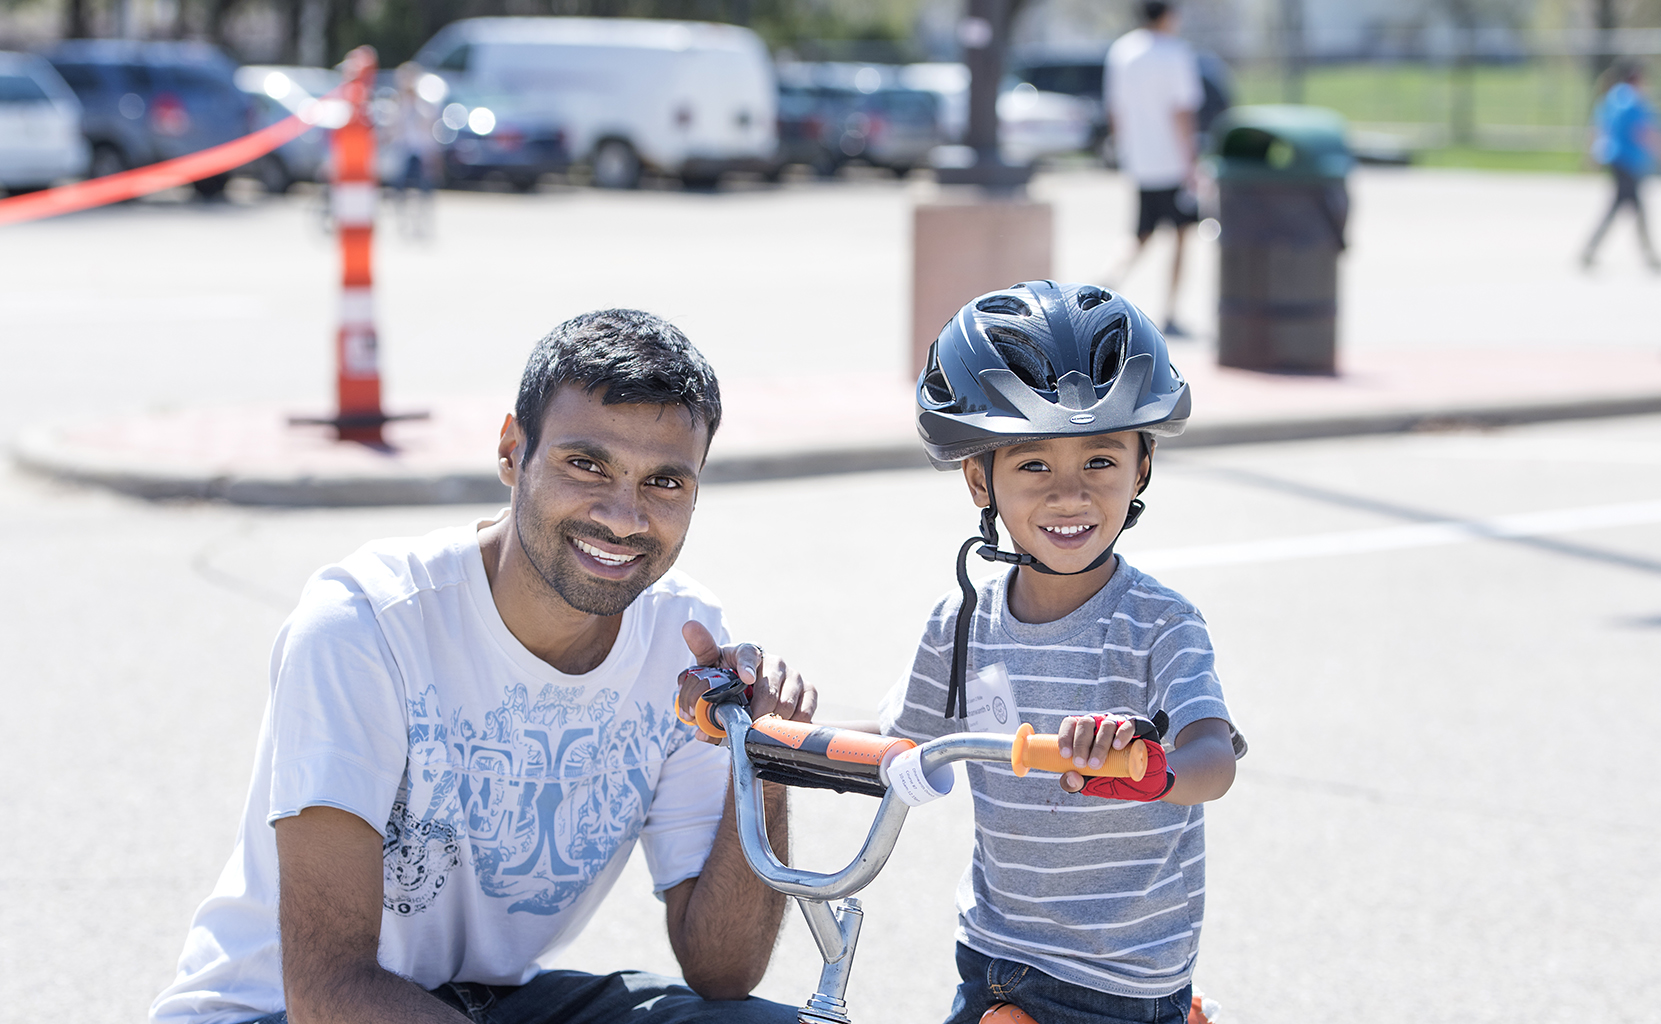 A man is crouching down next to a small child that is sitting on a bike with a helmet on the blacktop or a parking lot